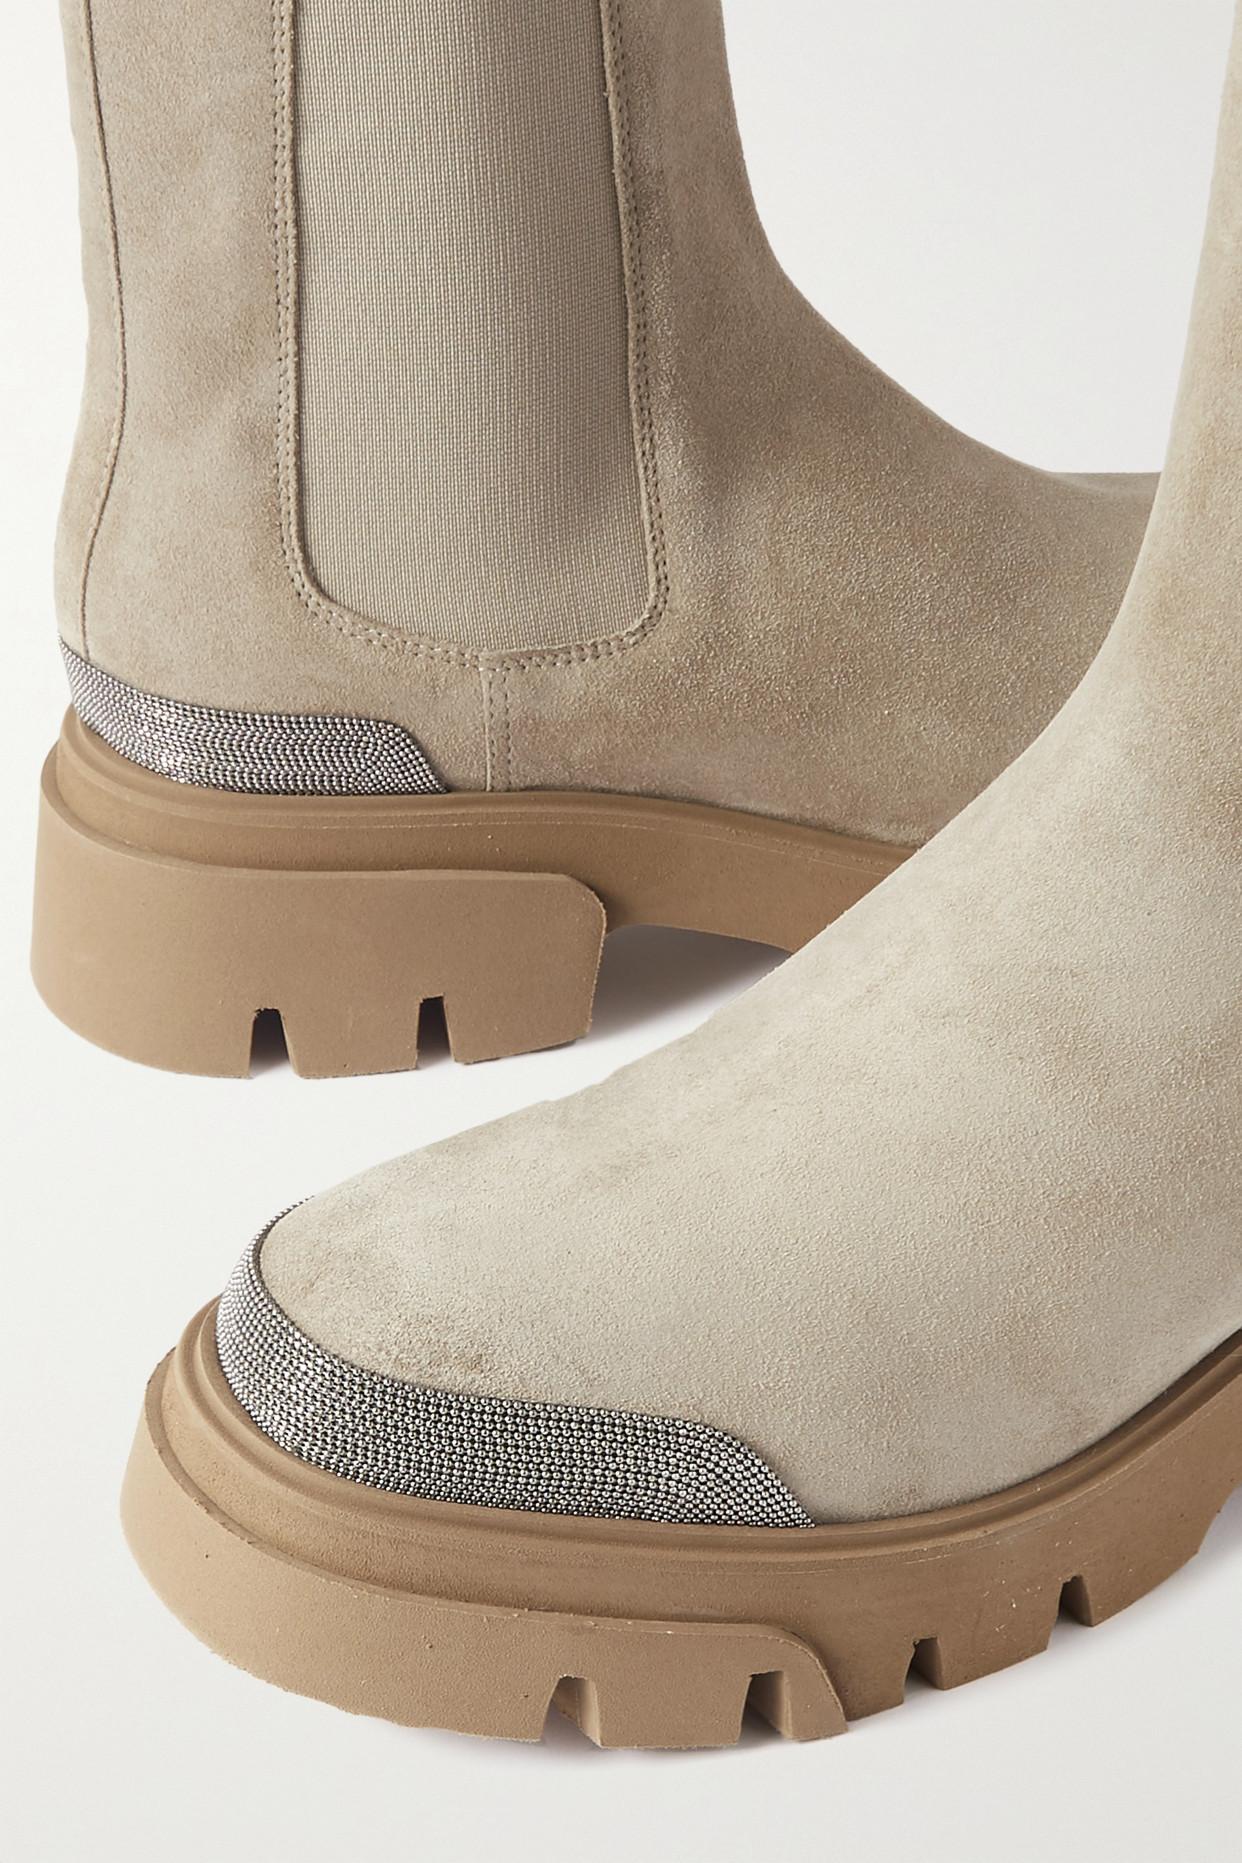 Brunello Cucinelli Bead-embellished Suede Chelsea Boots in Gray | Lyst